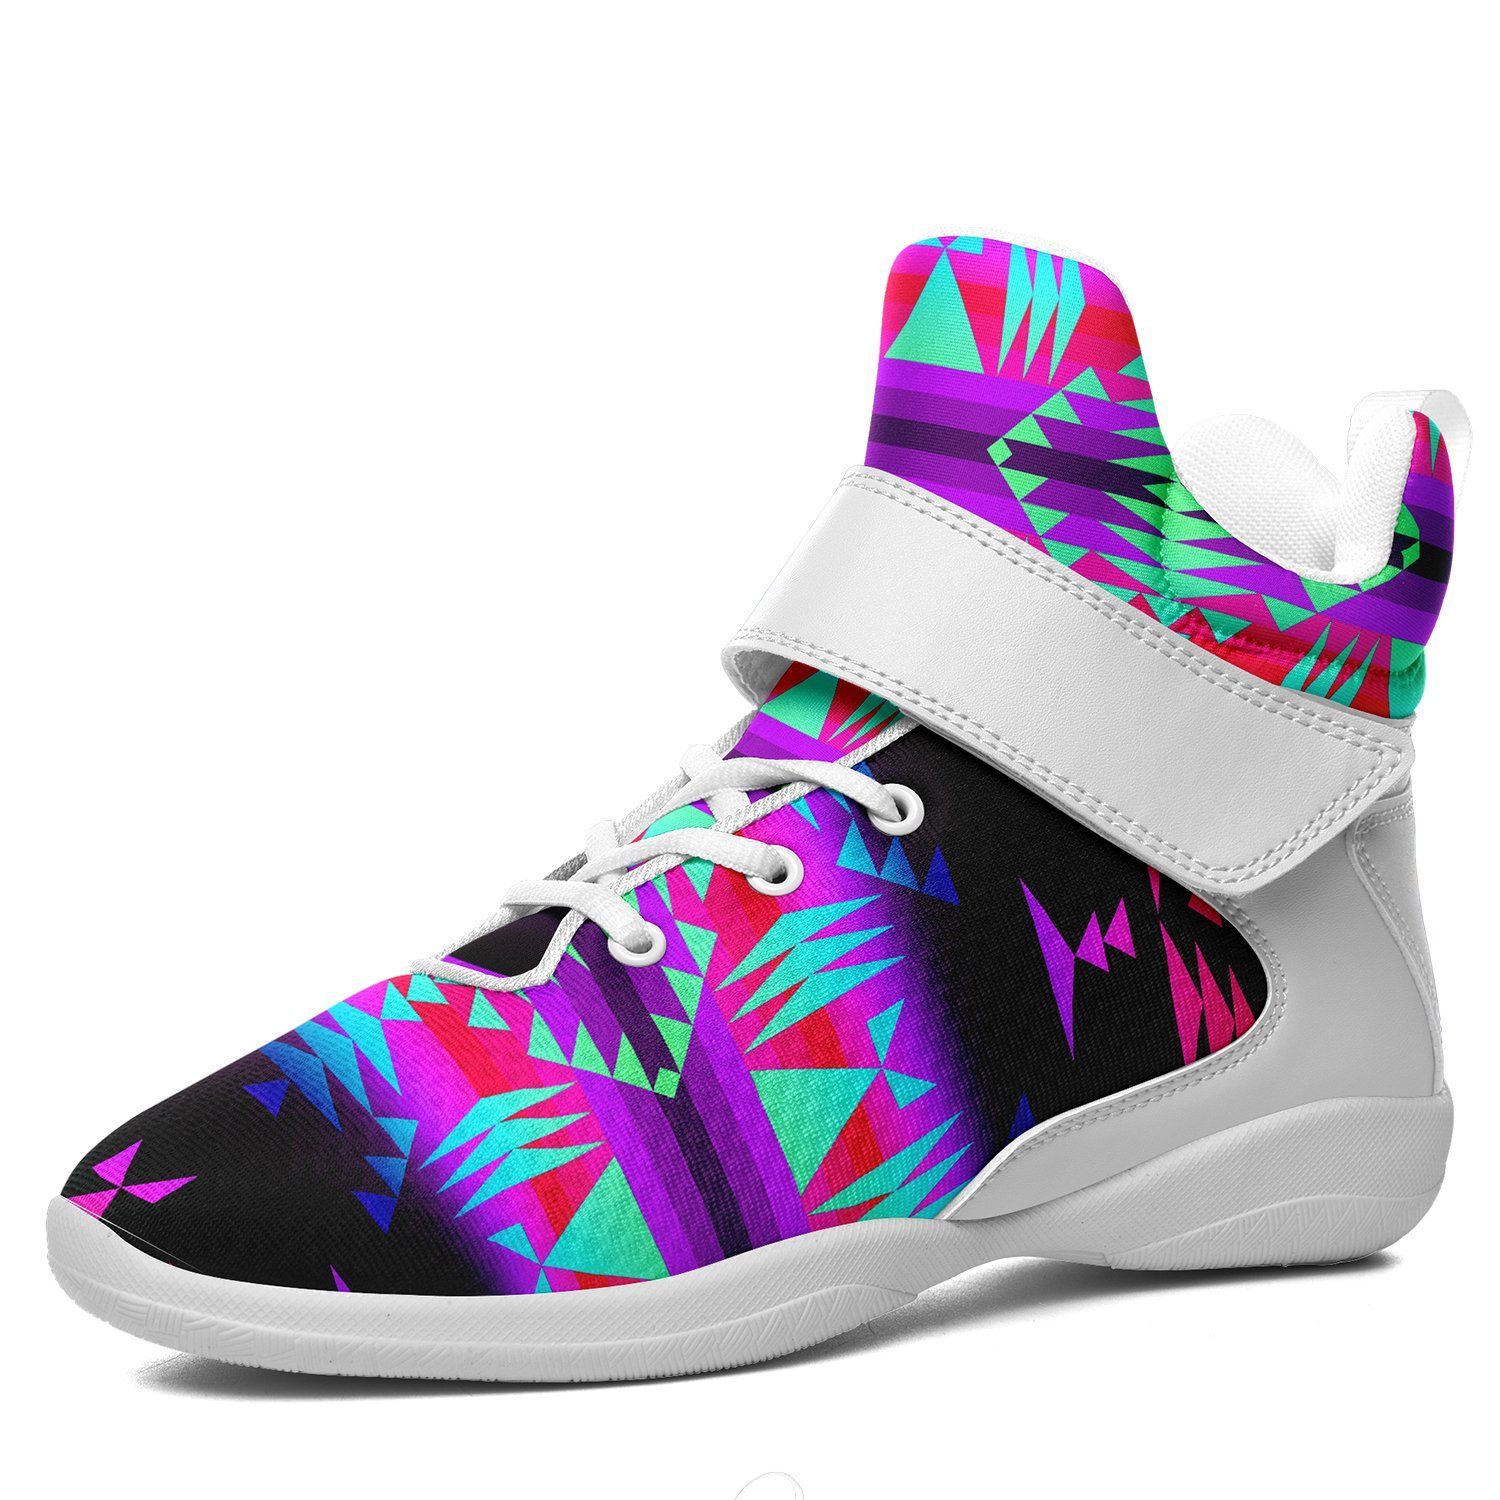 Between the Rocky Mountains Ipottaa Basketball / Sport High Top Shoes - White Sole 49 Dzine US Men 7 / EUR 40 White Sole with White Strap 